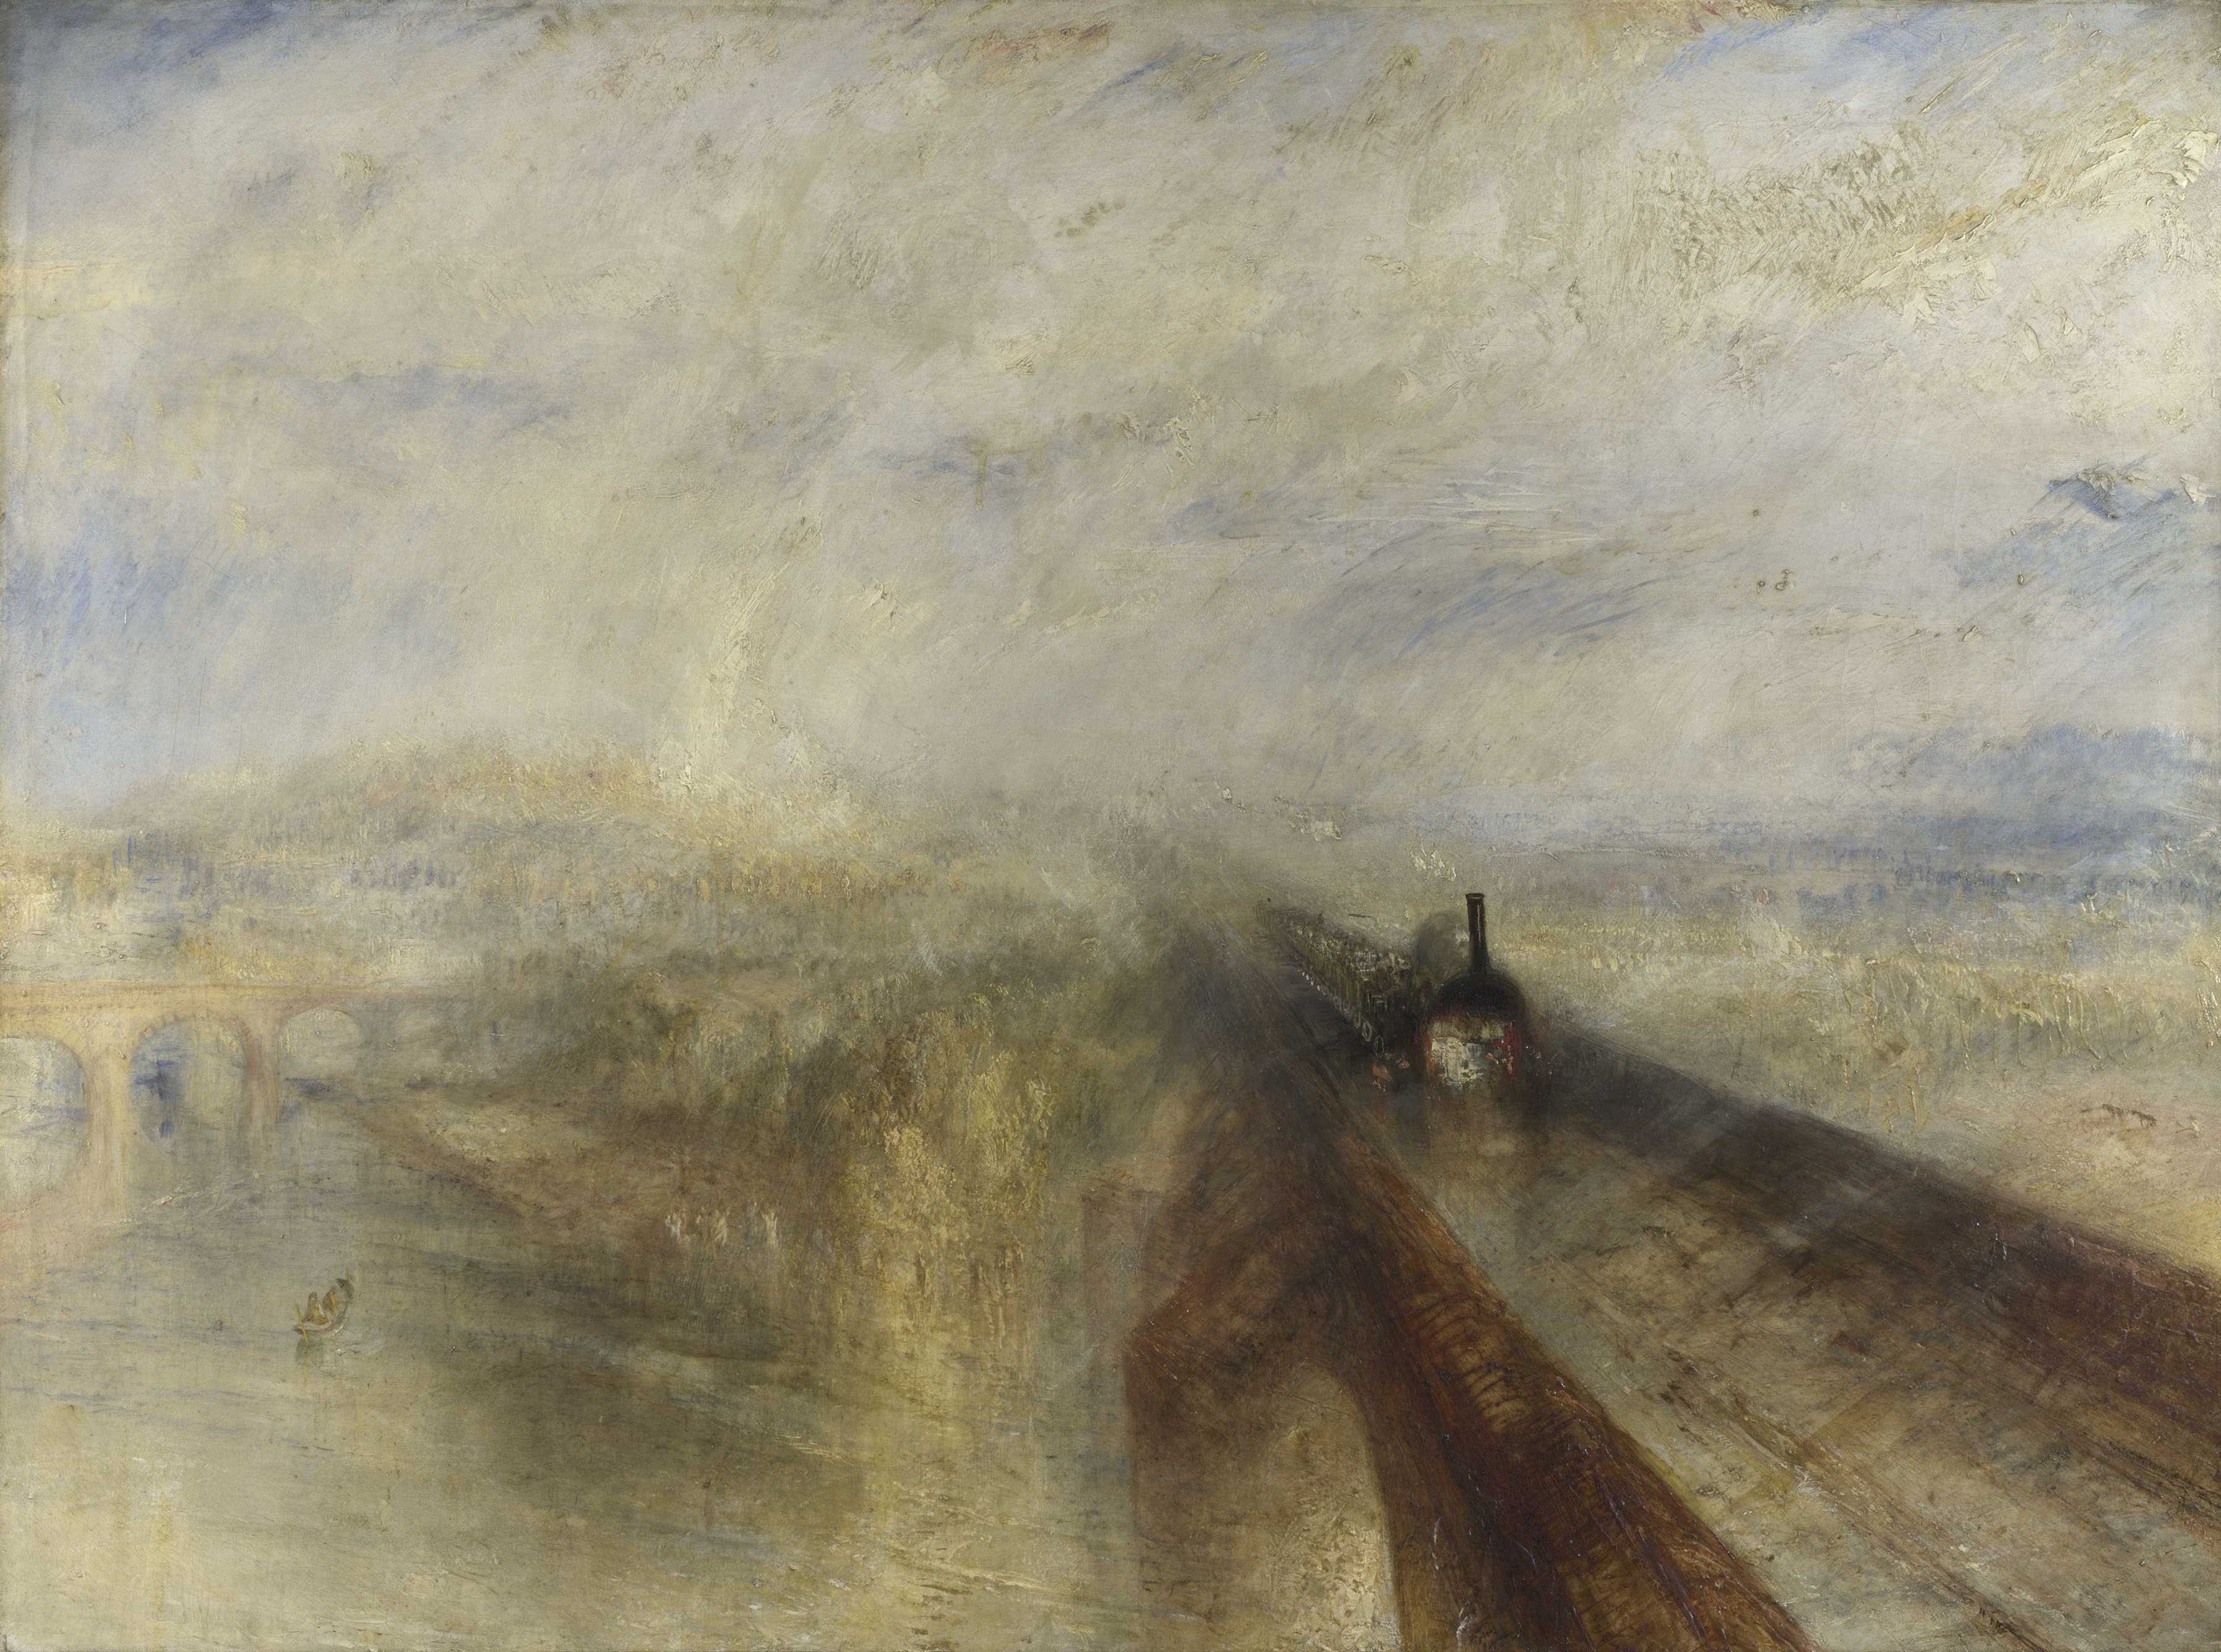 Joseph Mallord William Turner, Rain, Steam and Speed exhibited 1844. The National Gallery, London. © The National Gallery, London